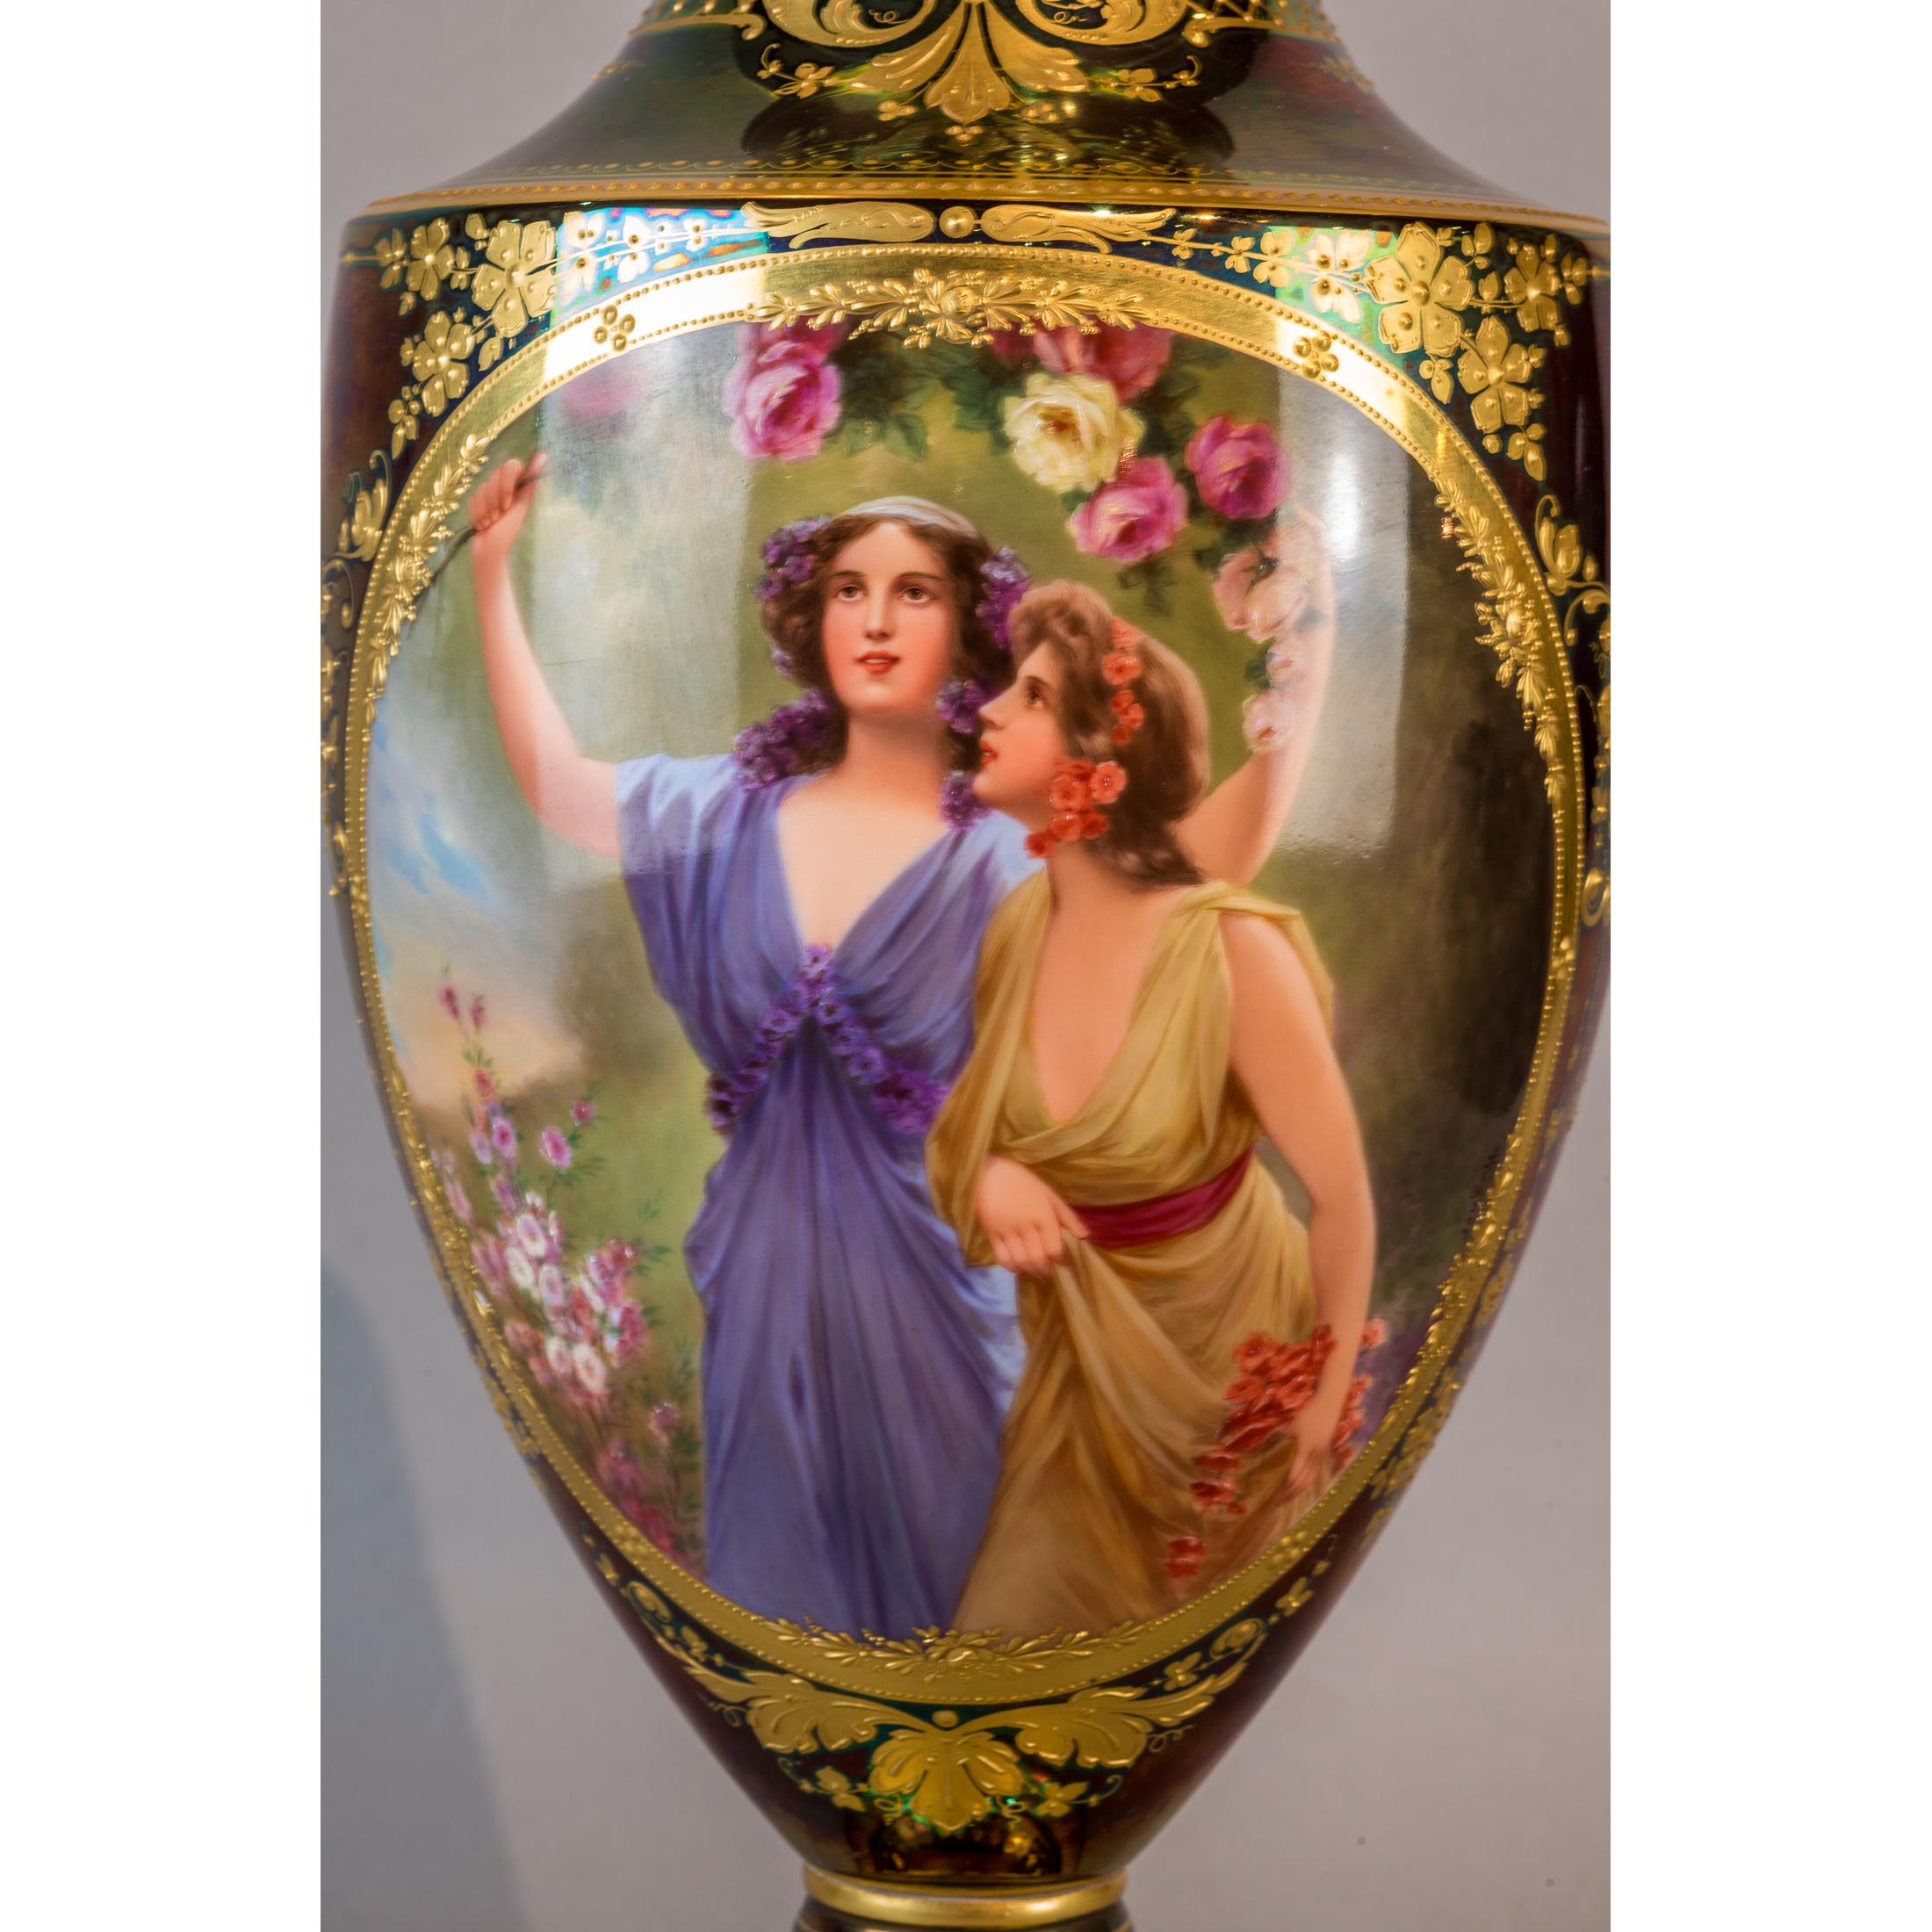 19th Century Fine Royal Vienna Gilt-Decorated Jeweled Iridescent Porcelain Urn For Sale